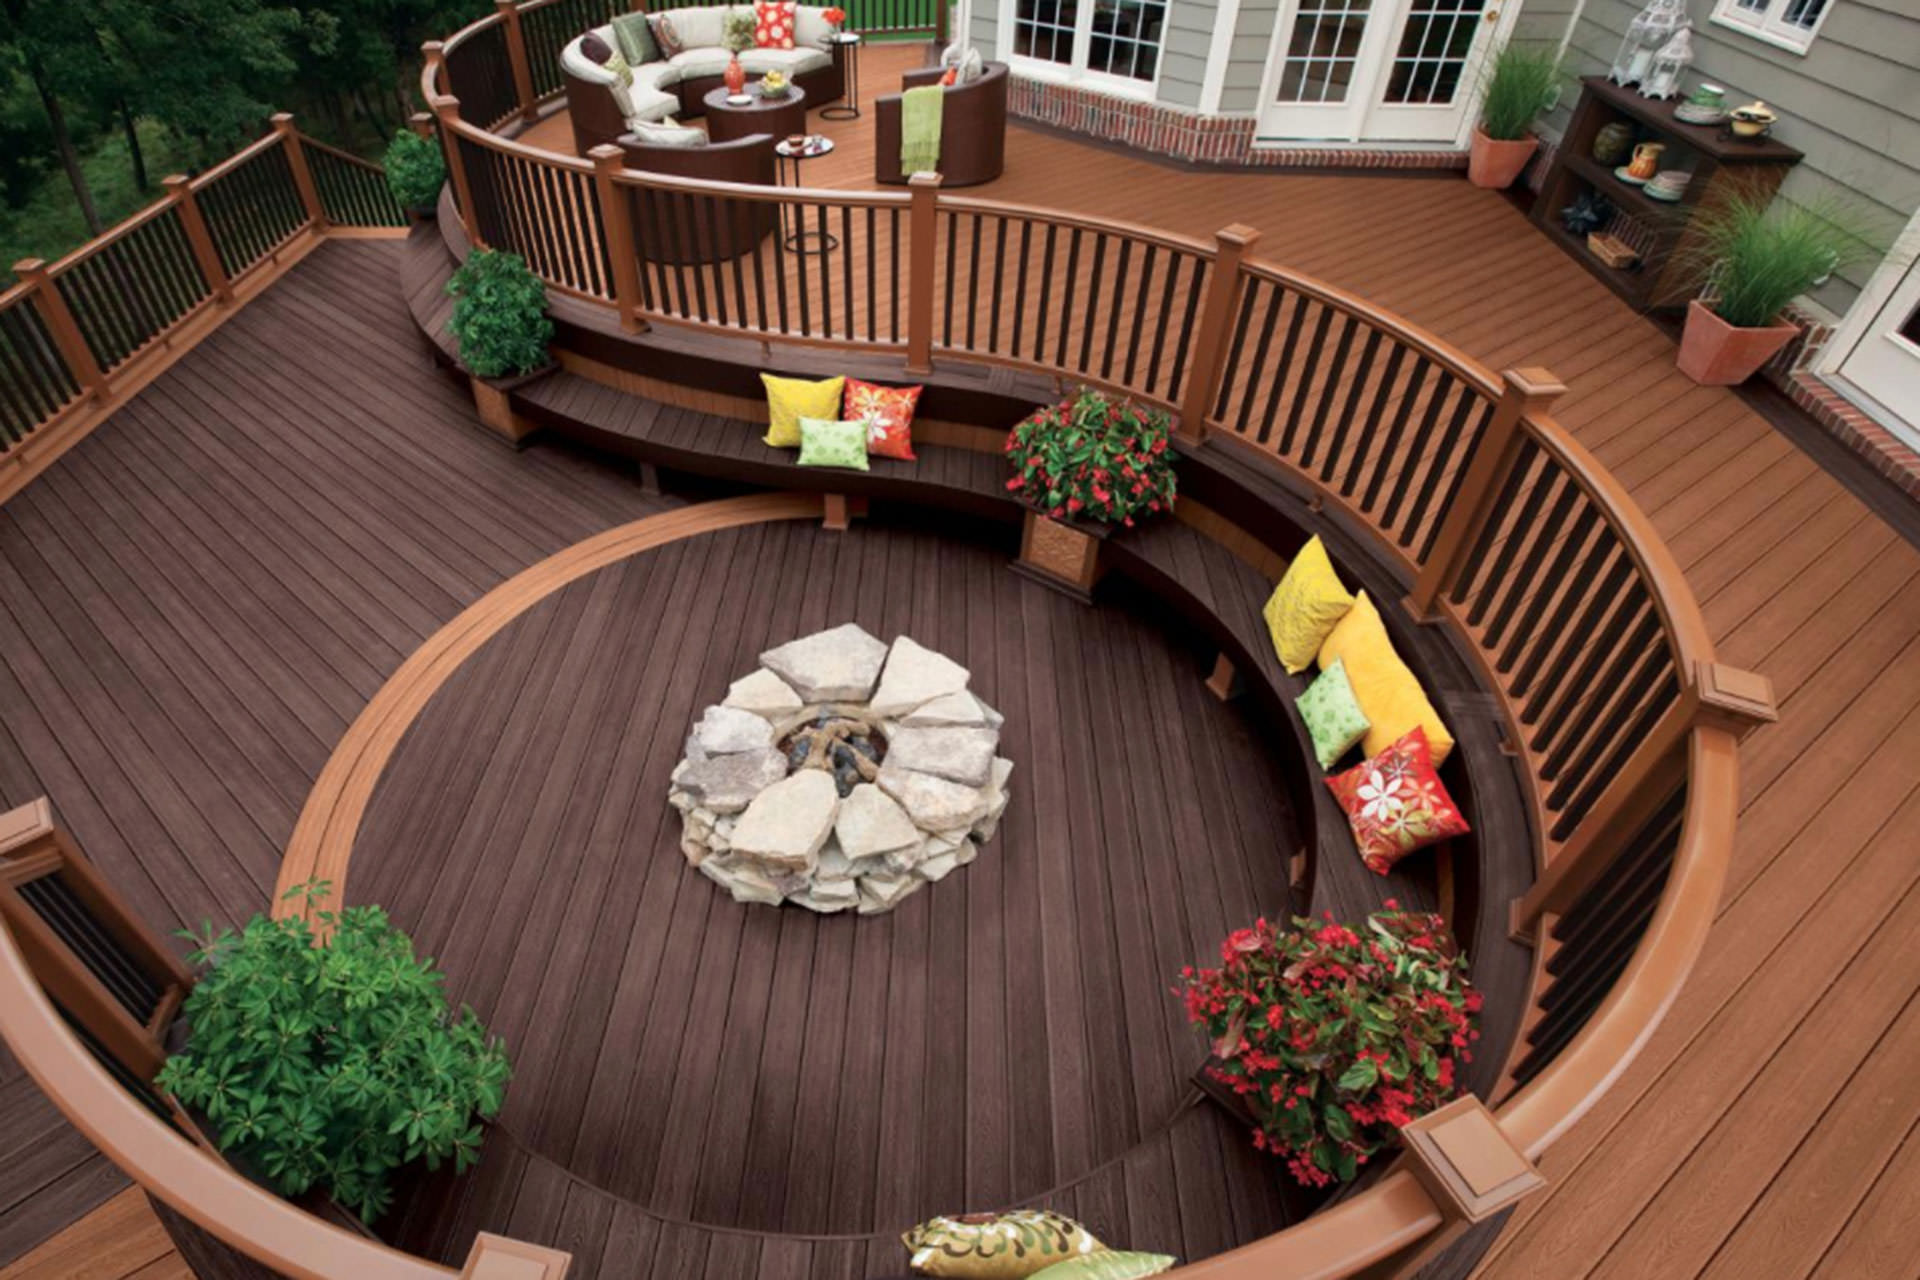 Wood, Composite, or PVC: A Guide to Choosing Deck Materials